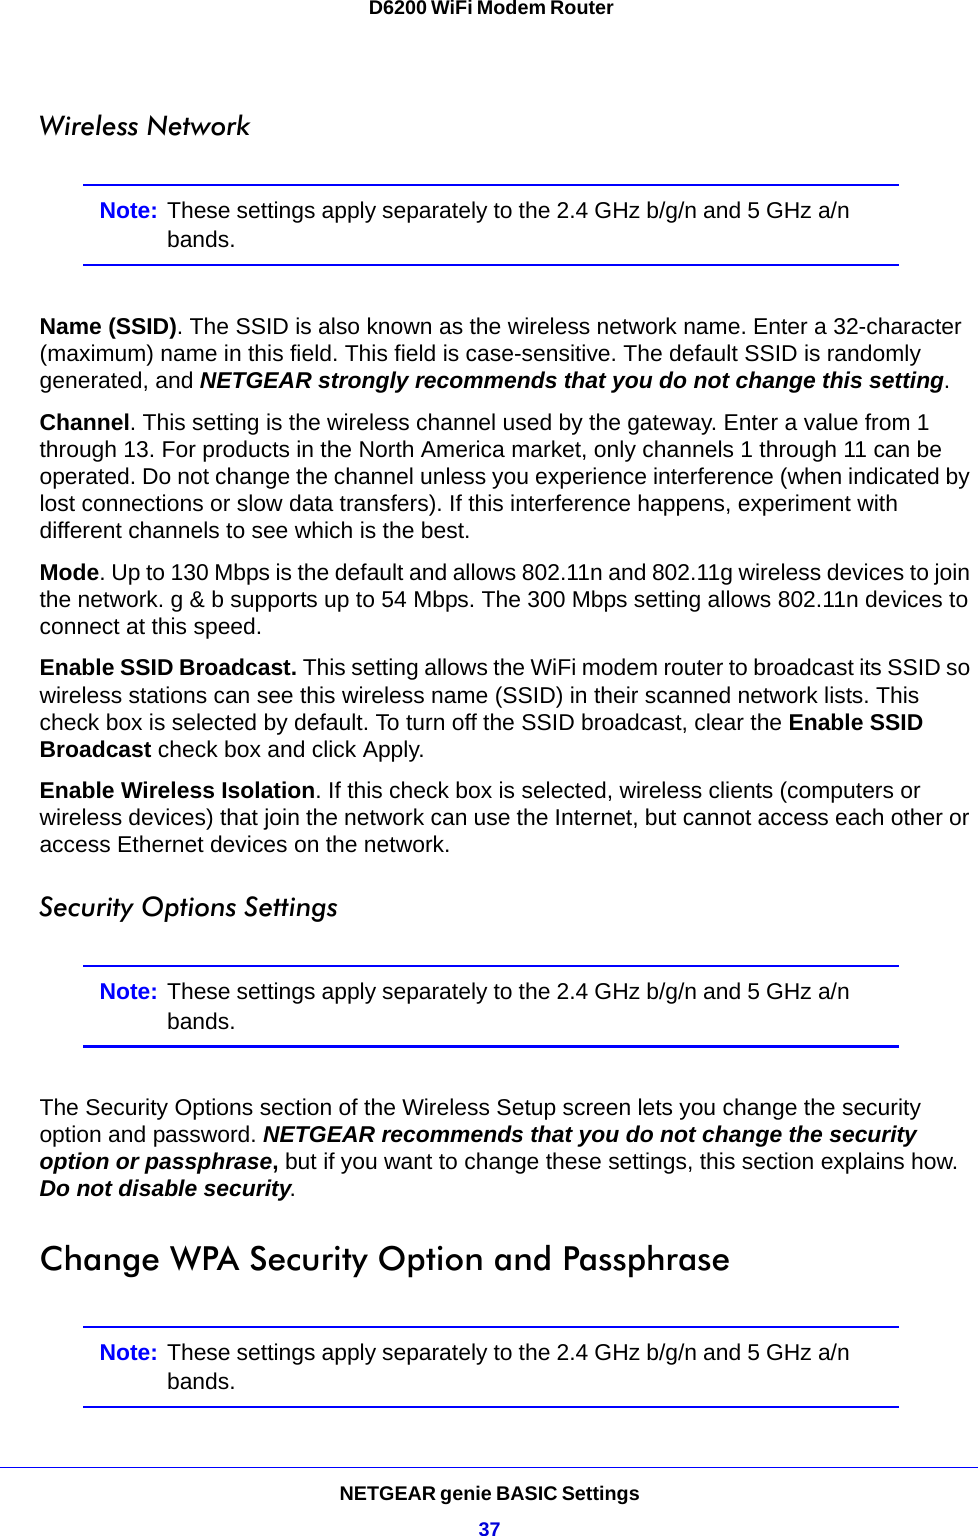 NETGEAR genie BASIC Settings37 D6200 WiFi Modem RouterWireless NetworkNote: These settings apply separately to the 2.4 GHz b/g/n and 5 GHz a/n bands.Name (SSID). The SSID is also known as the wireless network name. Enter a 32-character (maximum) name in this field. This field is case-sensitive. The default SSID is randomly generated, and NETGEAR strongly recommends that you do not change this setting.Channel. This setting is the wireless channel used by the gateway. Enter a value from 1 through 13. For products in the North America market, only channels 1 through 11 can be operated. Do not change the channel unless you experience interference (when indicated by lost connections or slow data transfers). If this interference happens, experiment with different channels to see which is the best. Mode. Up to 130 Mbps is the default and allows 802.11n and 802.11g wireless devices to join the network. g &amp; b supports up to 54 Mbps. The 300 Mbps setting allows 802.11n devices to connect at this speed.Enable SSID Broadcast. This setting allows the WiFi modem router to broadcast its SSID so wireless stations can see this wireless name (SSID) in their scanned network lists. This check box is selected by default. To turn off the SSID broadcast, clear the Enable SSID Broadcast check box and click Apply.Enable Wireless Isolation. If this check box is selected, wireless clients (computers or wireless devices) that join the network can use the Internet, but cannot access each other or access Ethernet devices on the network.Security Options SettingsNote: These settings apply separately to the 2.4 GHz b/g/n and 5 GHz a/n bands.The Security Options section of the Wireless Setup screen lets you change the security option and password. NETGEAR recommends that you do not change the security option or passphrase, but if you want to change these settings, this section explains how. Do not disable security.Change WPA Security Option and PassphraseNote: These settings apply separately to the 2.4 GHz b/g/n and 5 GHz a/n bands.